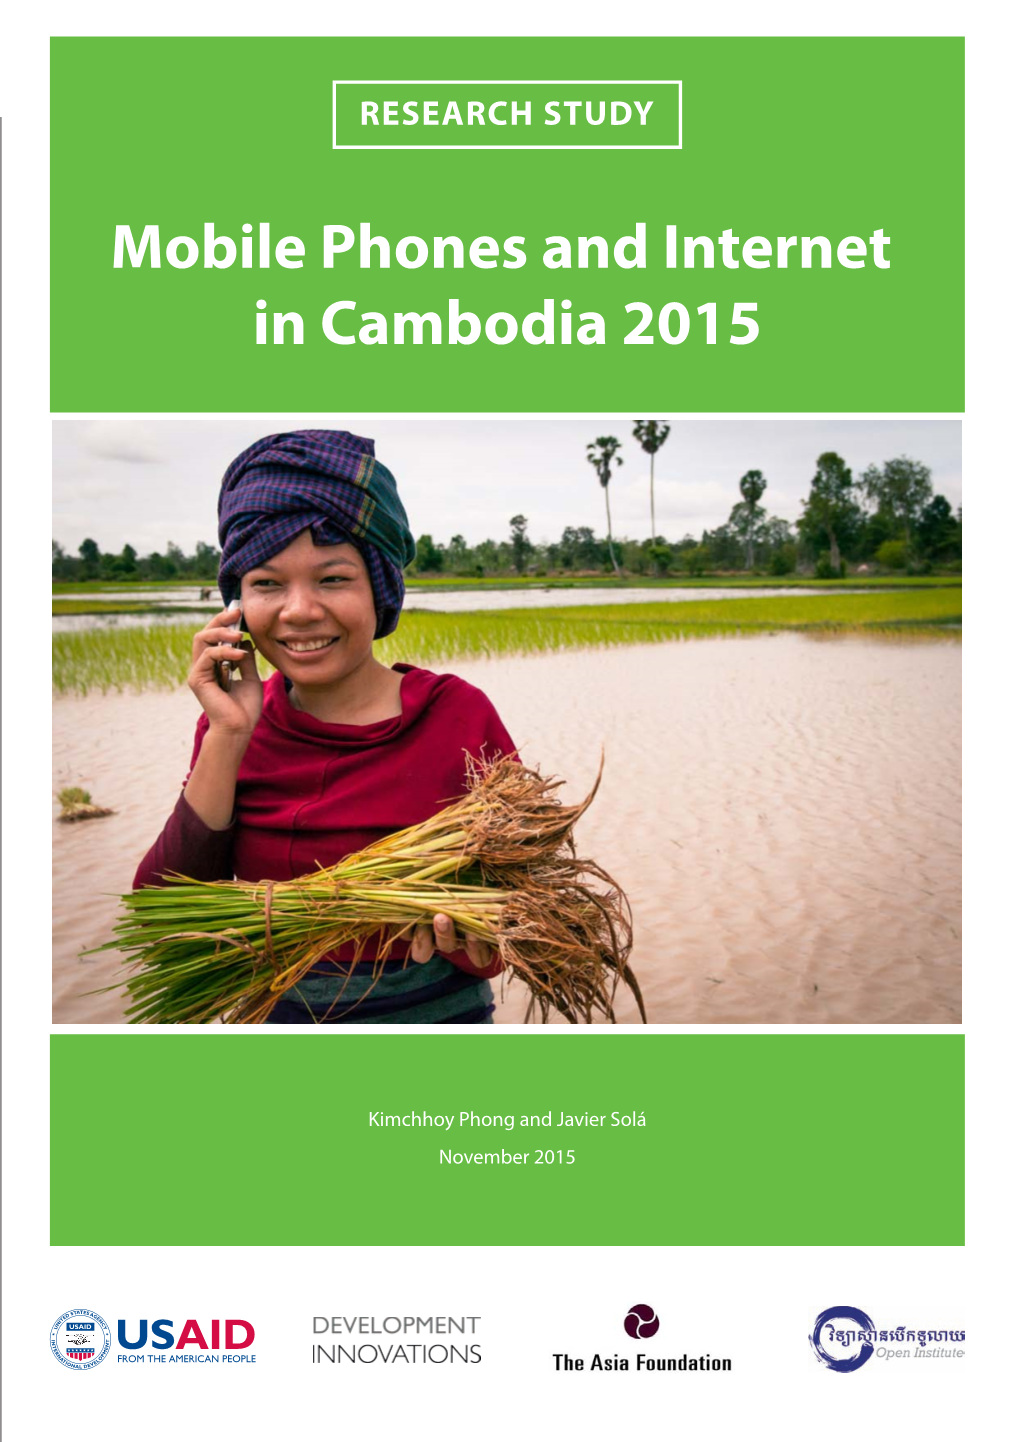 Mobile Phones and Internet in Cambodia 2015